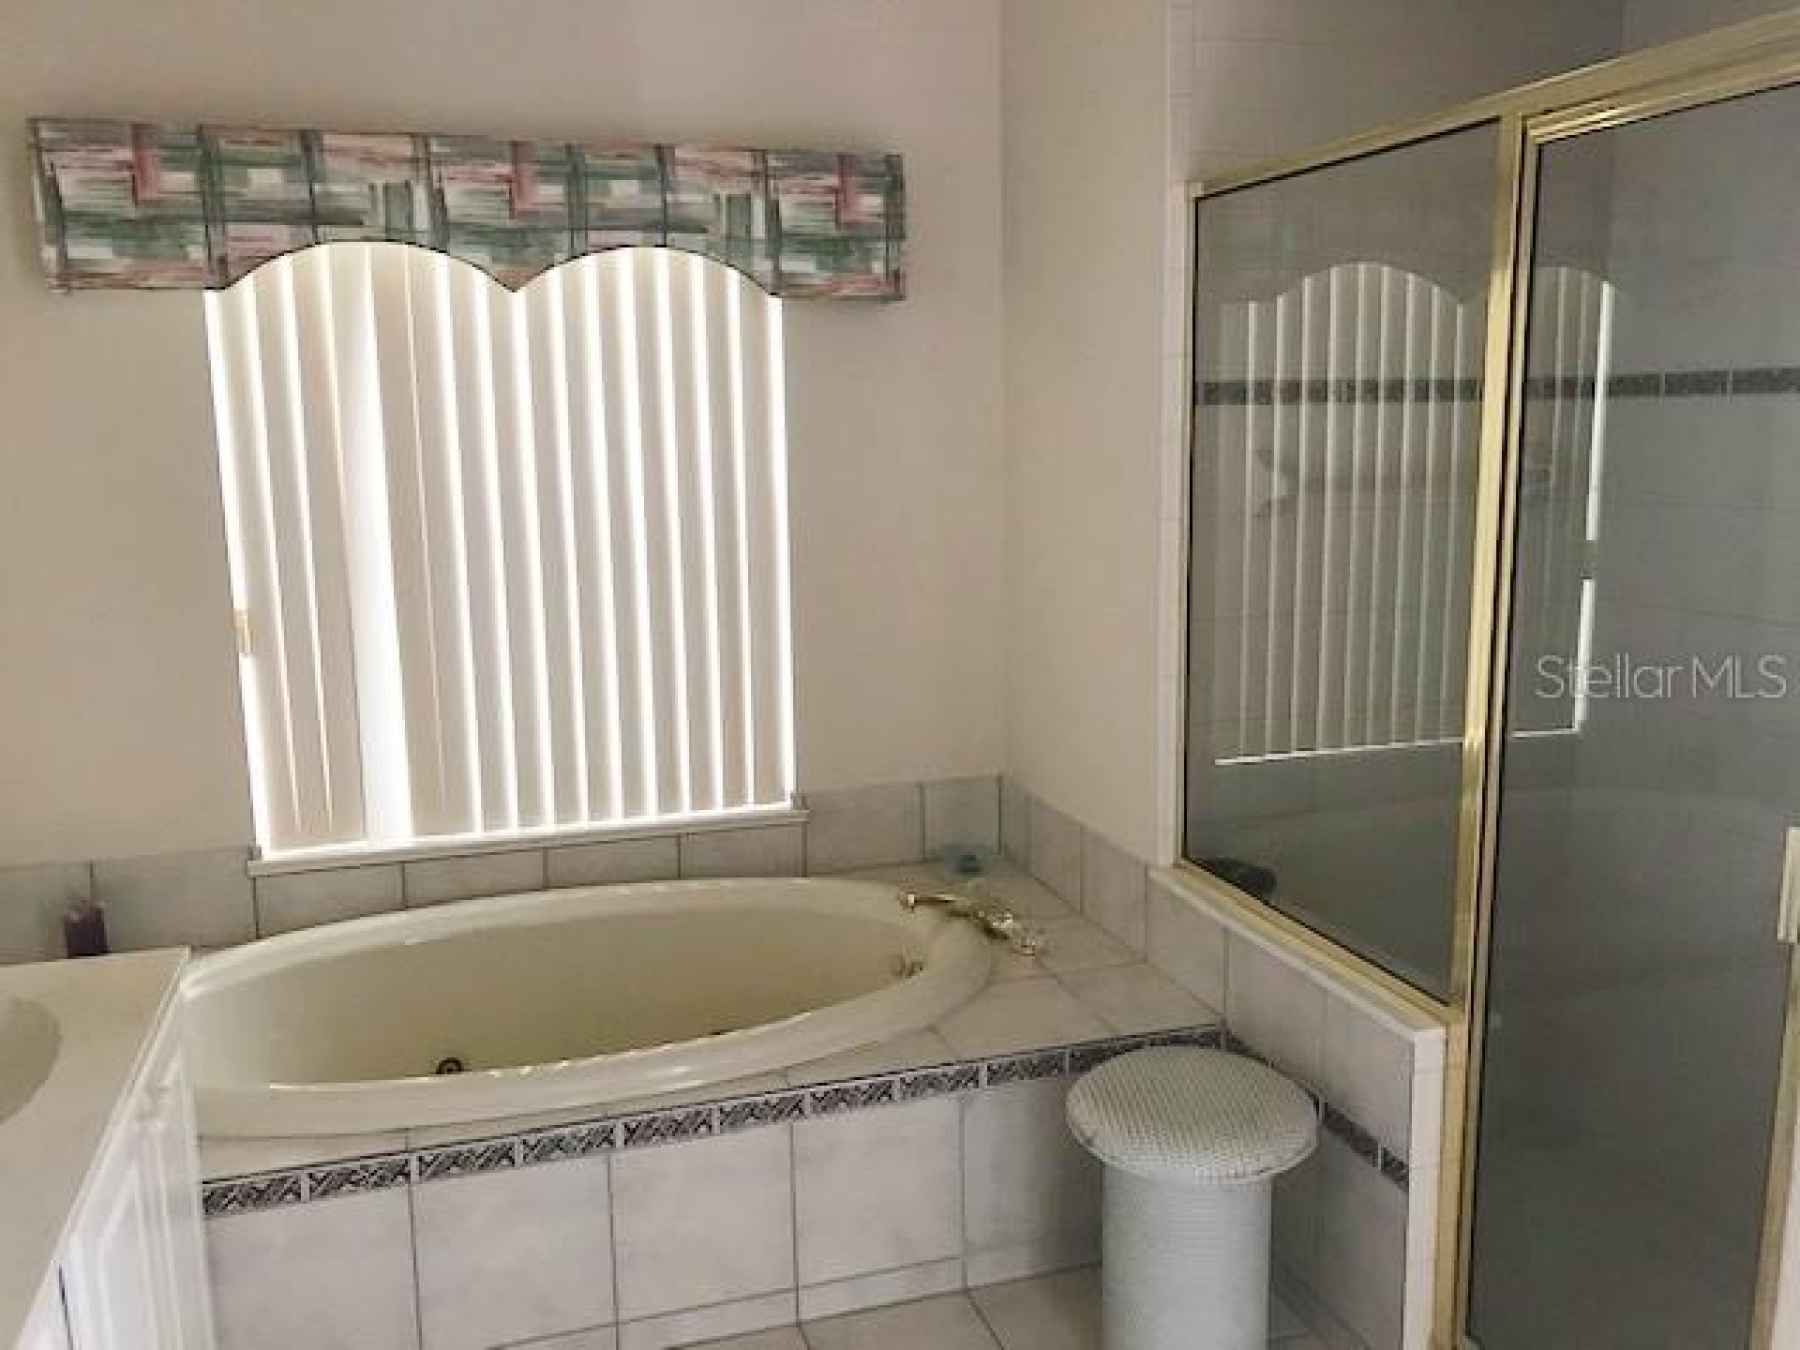 His & Her Sinks with Jacuzzi Tub and separate Shower